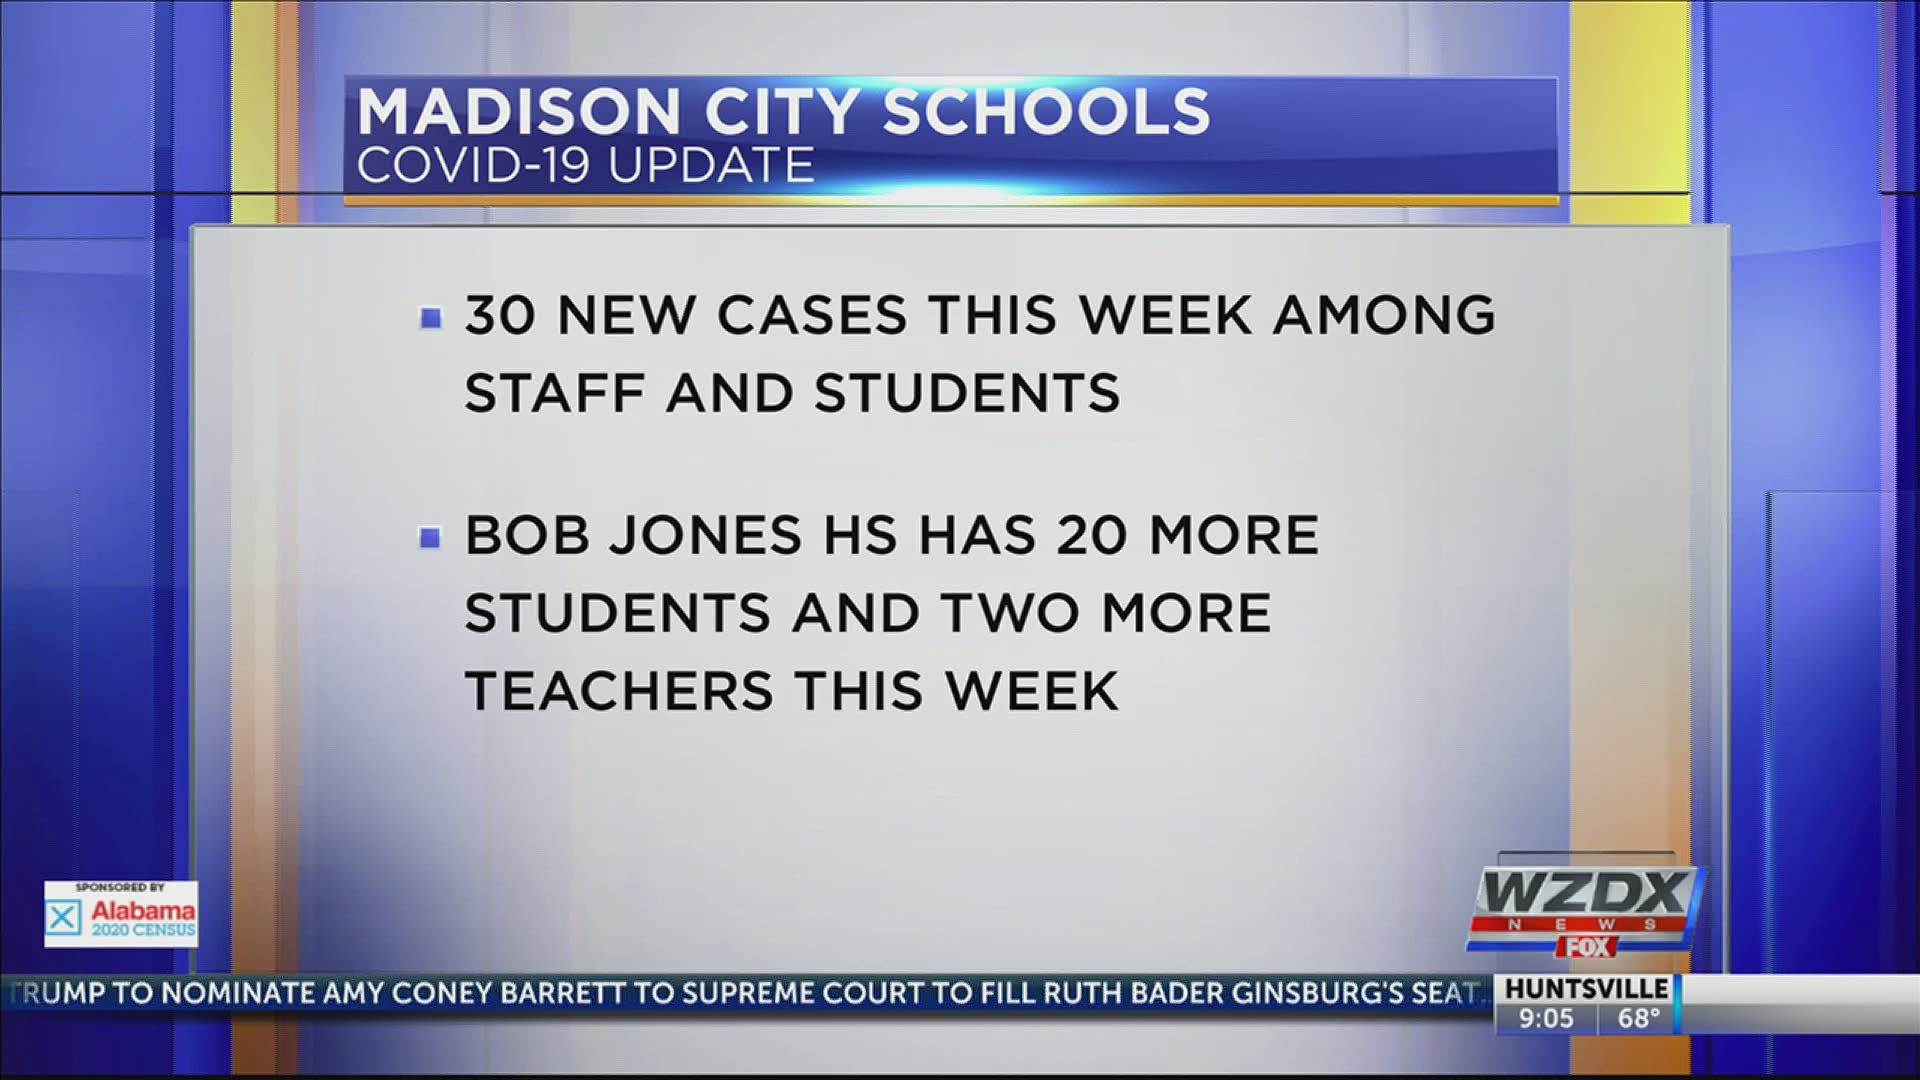 Superintendent Ed Nichols released the latest COVID-19 numbers for Madison City Schools.